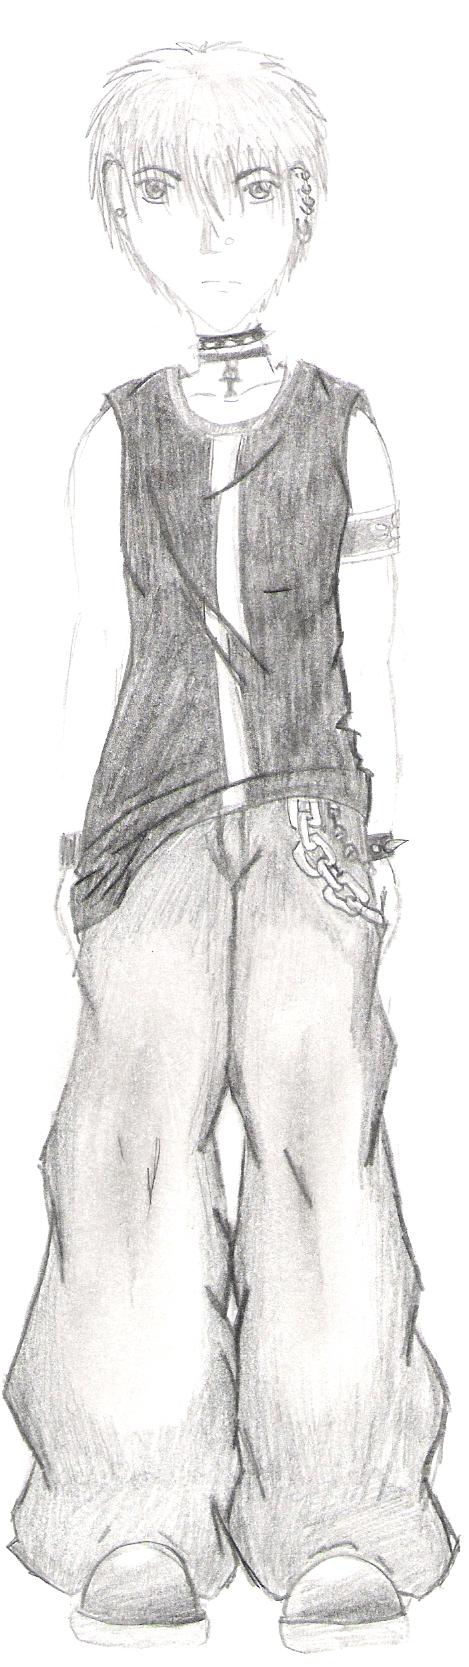 First Drawn Character for my Novel by MessangeroftheFallen